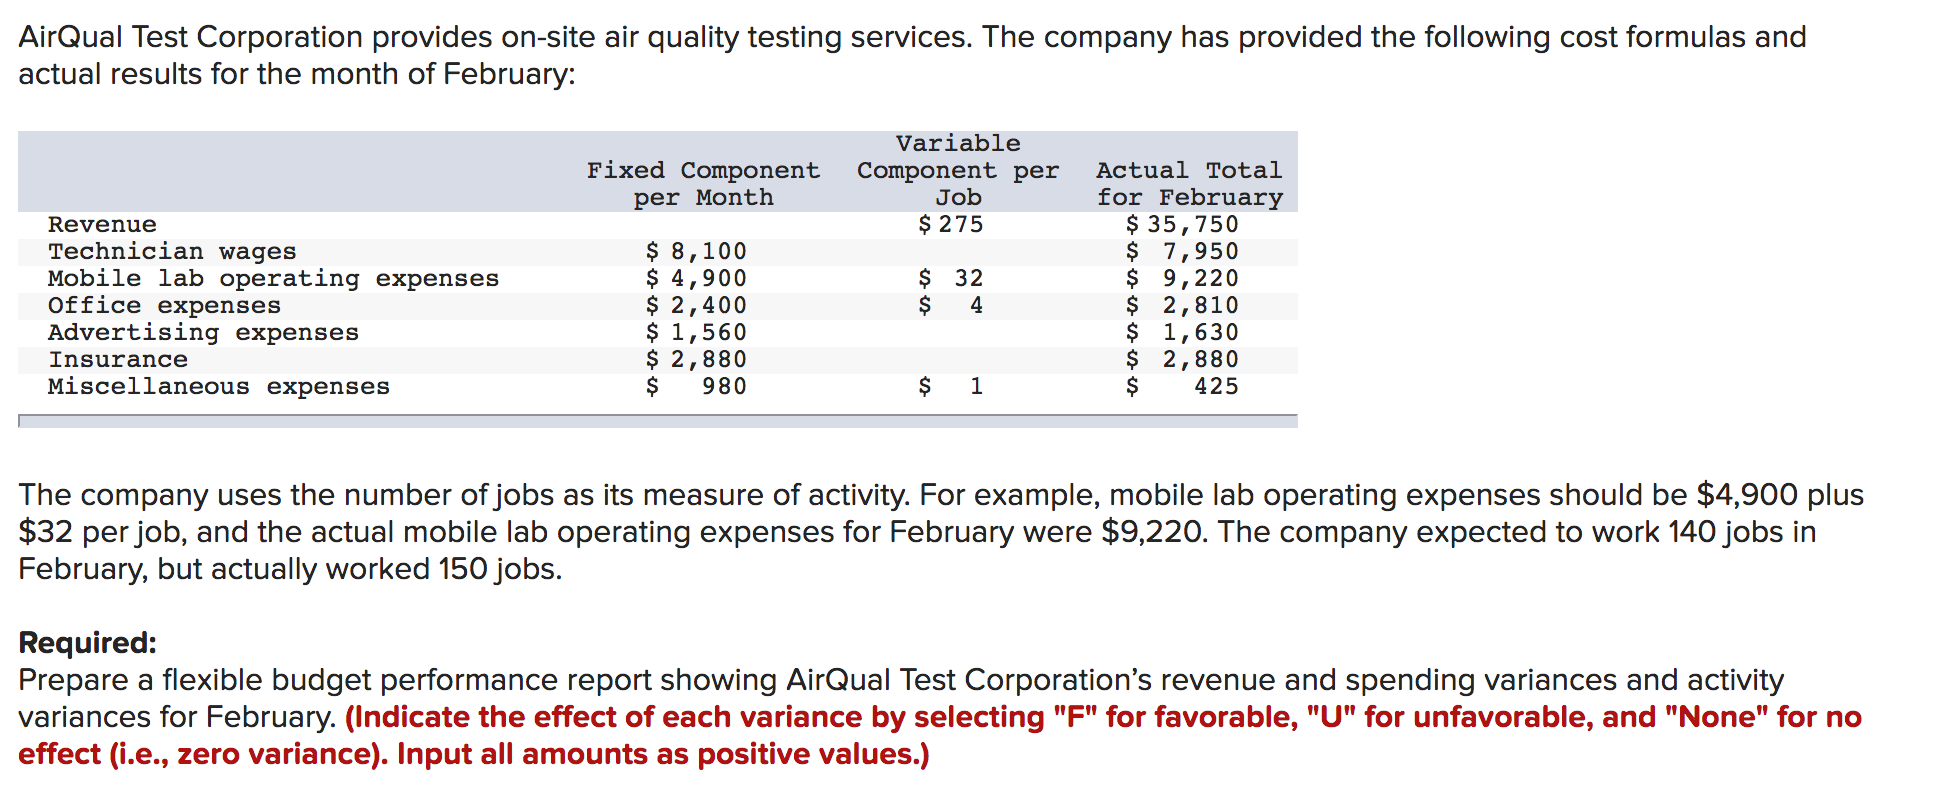 AirQual Test Corporation provides on-site air quality testing services. The company has provided the following cost formulas and
actual results for the month of February:
Variable
Fixed Component
per Month
Component per
Job
$ 275
Actual Total
Revenue
Technician wages
Mobile lab operating expenses
Office expenses
Advertising expenses
$ 8,100
$ 4,900
$ 2,400
$ 1,560
$ 2,880
980
for February
$ 35,750
$ 7,950
$ 9,220
$ 2,810
$ 1,630
$ 2,880
425
$ 32
4
Insurance
Miscellaneous expenses
The company uses the number of jobs as its measure of activity. For example, mobile lab operating expenses should be $4,900 plus
$32 per job, and the actual mobile lab operating expenses for February were $9,220. The company expected to work 140 jobs in
February, but actually worked 150 jobs.
Required:
Prepare a flexible budget performance report showing AirQual Test Corporation's revenue and spending variances and activity
variances for February. (Indicate the effect of each variance by selecting "F" for favorable, "U" for unfavorable, and "None" for no
effect (i.e., zero variance). Input all amounts as positive values.)
%24
